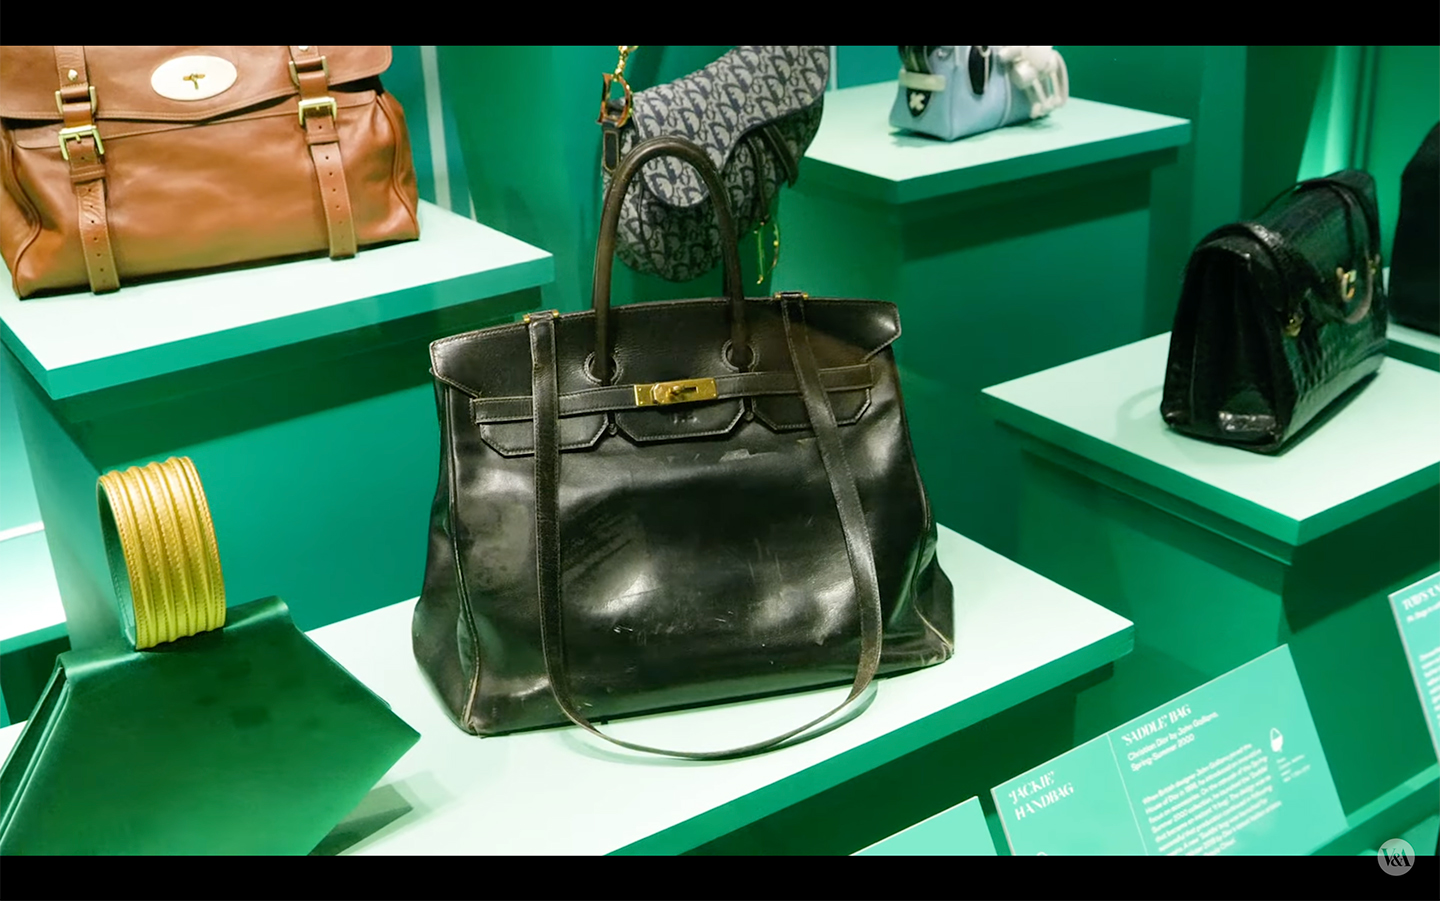 The first-ever made Hermès Birkin bag, owned by Jane Birkin, at the V&A exhibition in London - Bags: Inside Out 2021-2022, sponsored by Mulberry. Source: V&A Exhibition Video 